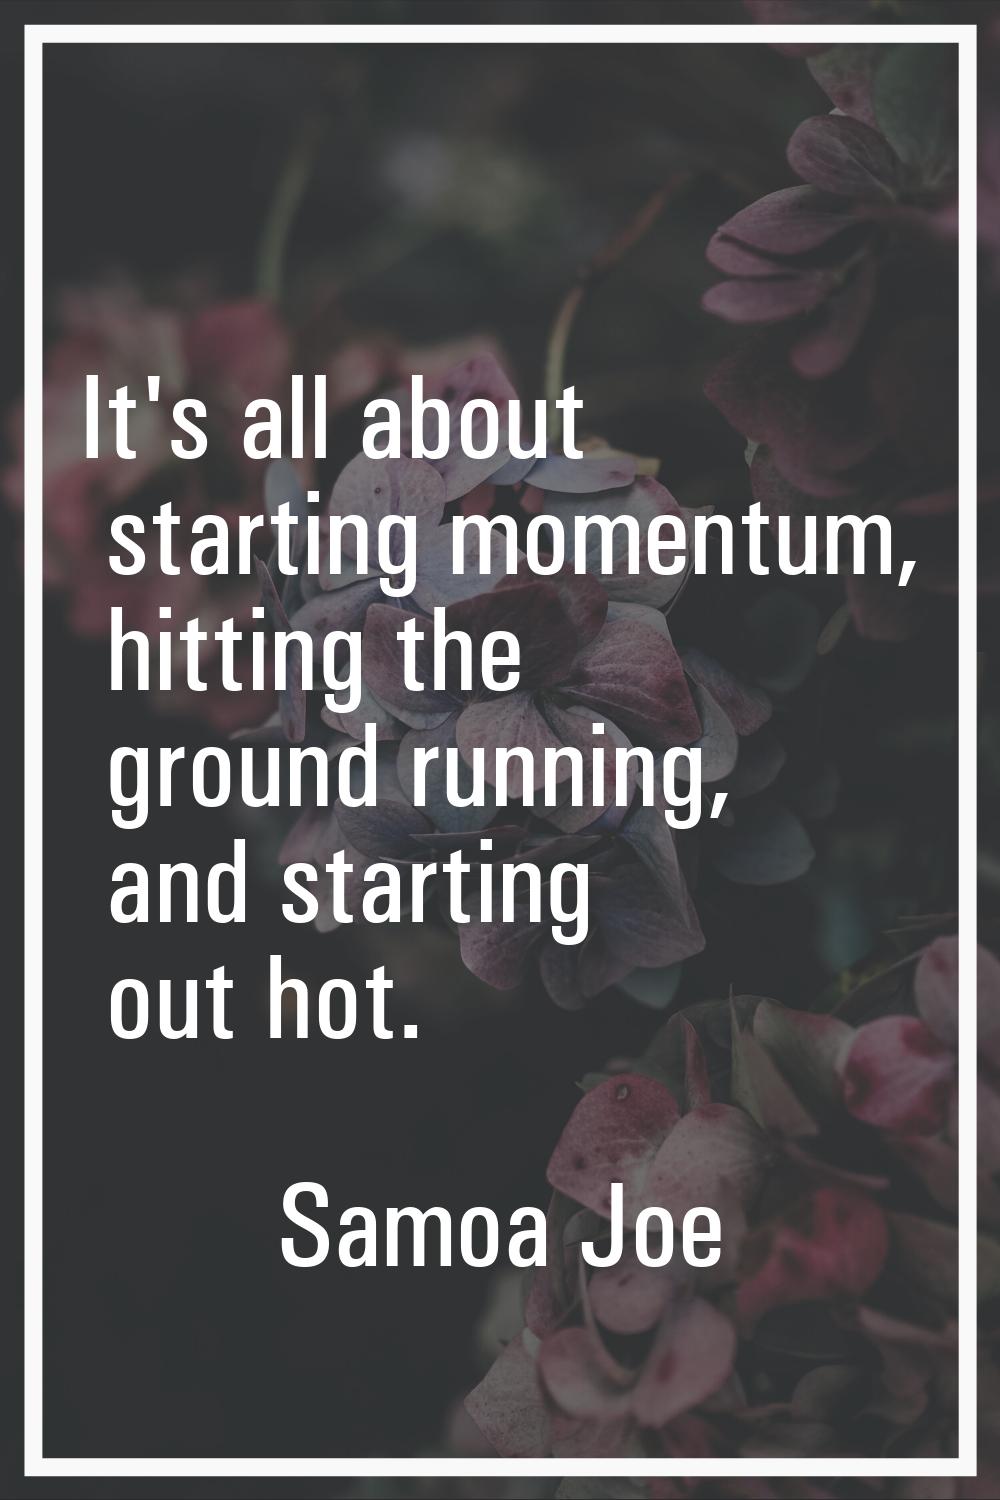 It's all about starting momentum, hitting the ground running, and starting out hot.